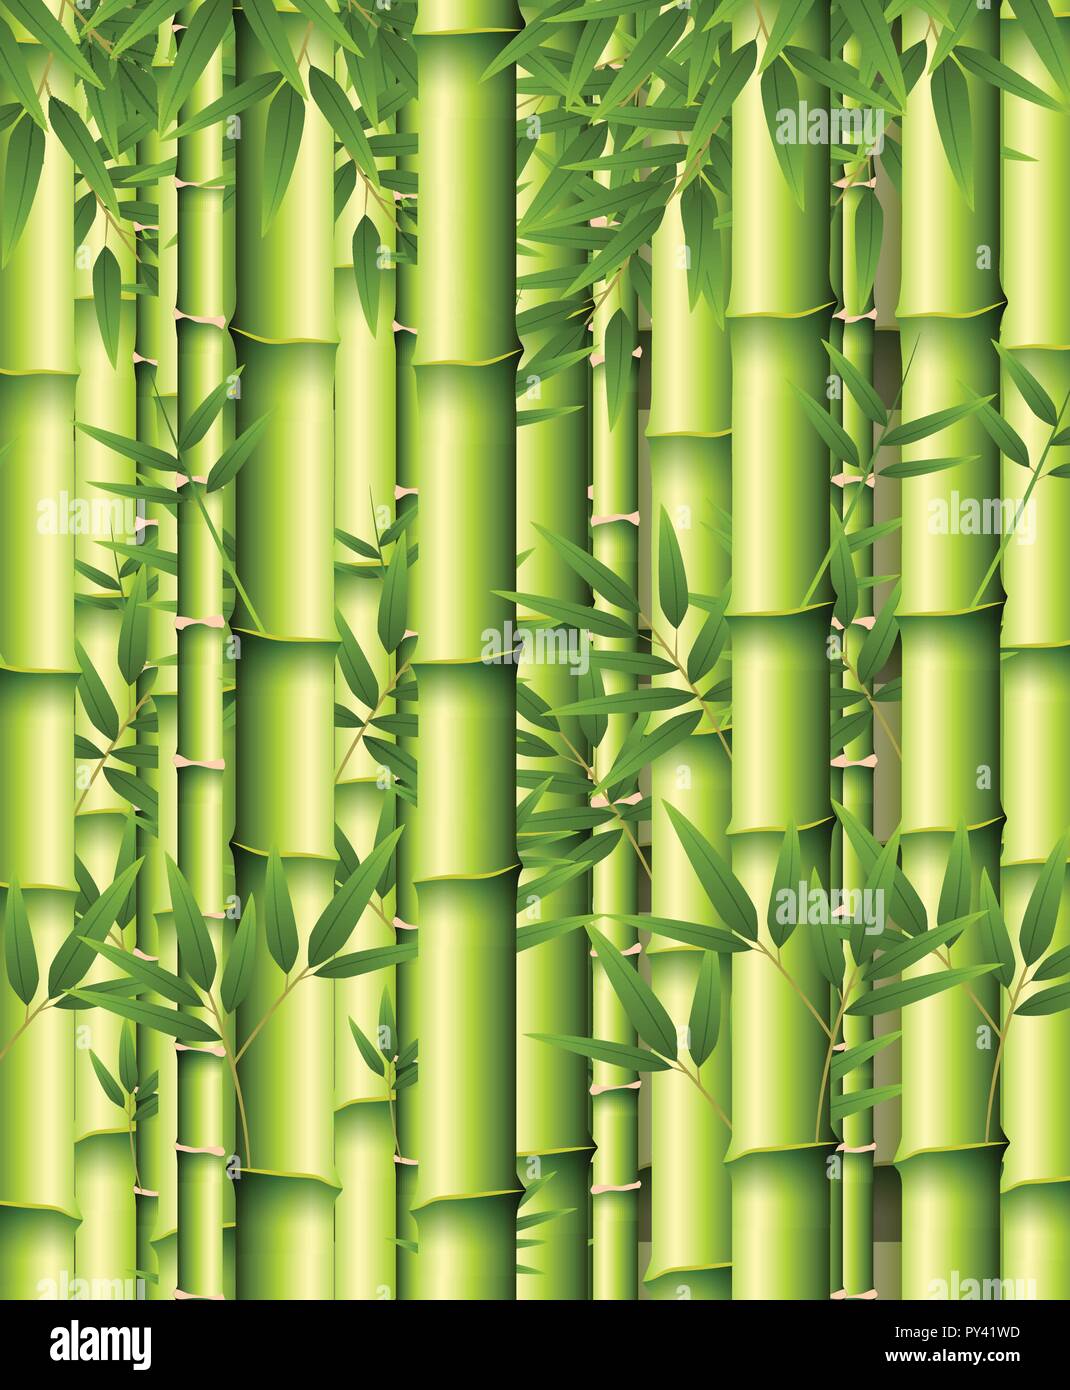 Sagano Bamboo Forest Wall Mural | About Murals